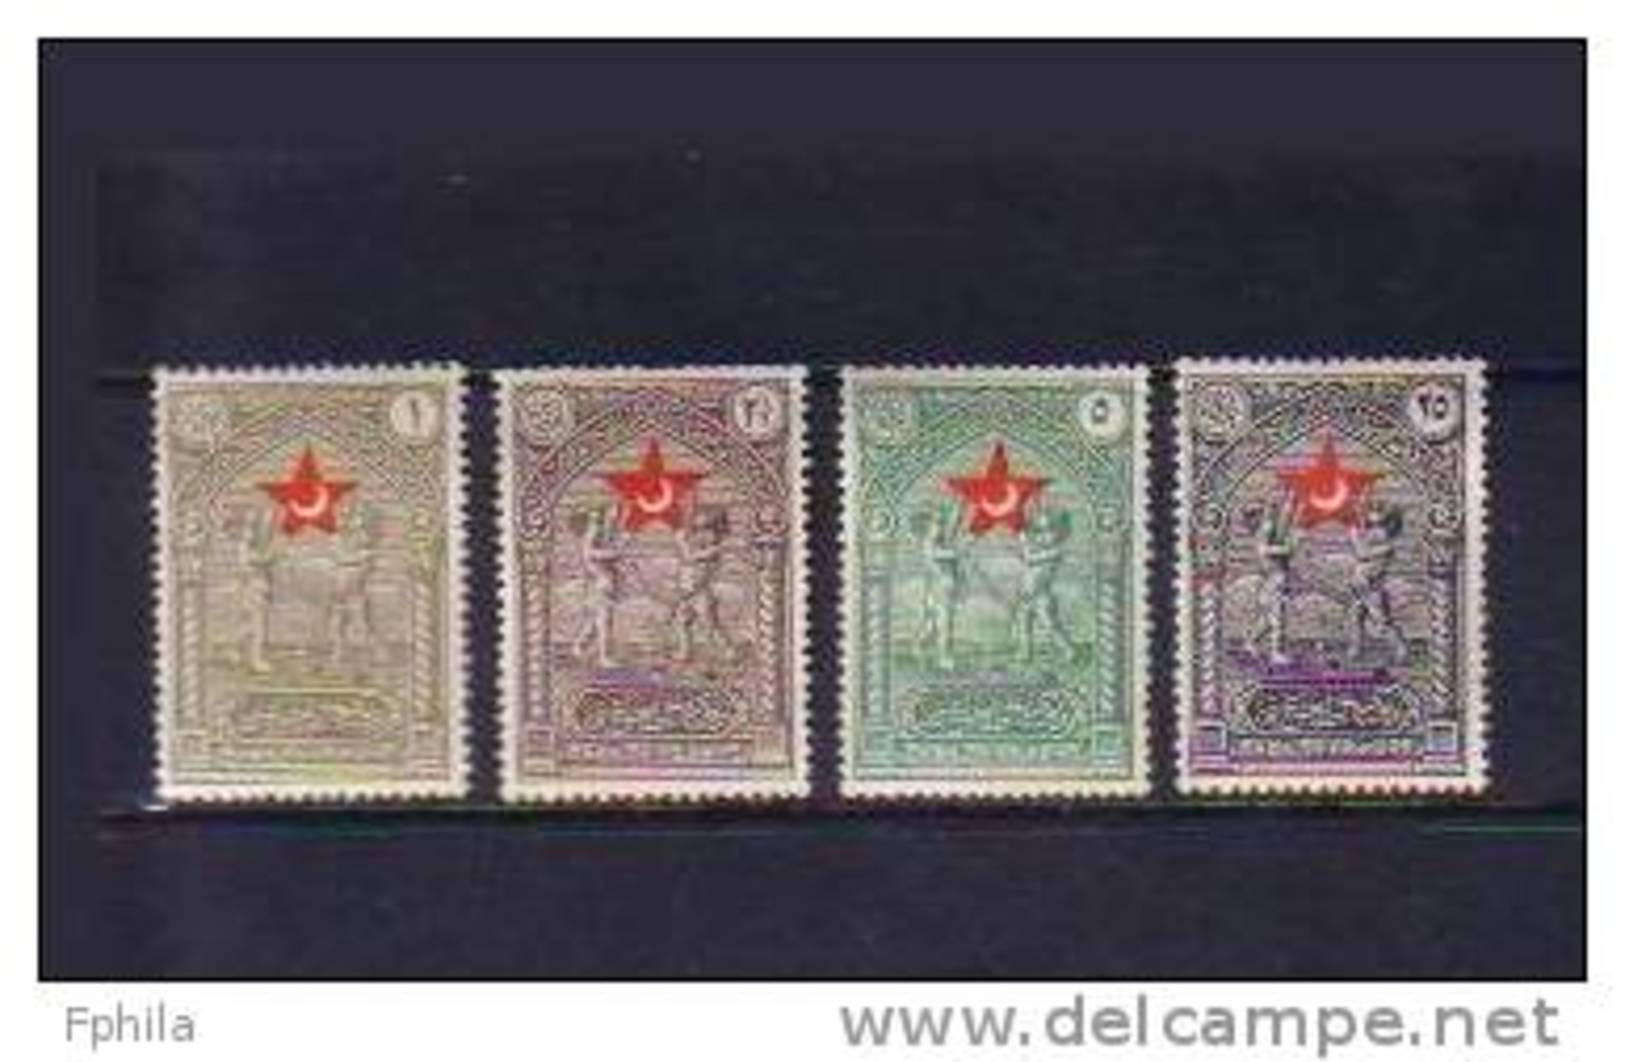 1928 TURKEY STAMPS IN AID OF THE TURKISH SOCIETY FOR THE PROTECTION OF CHILDREN MINT WITHOUT GUM - Timbres De Bienfaisance